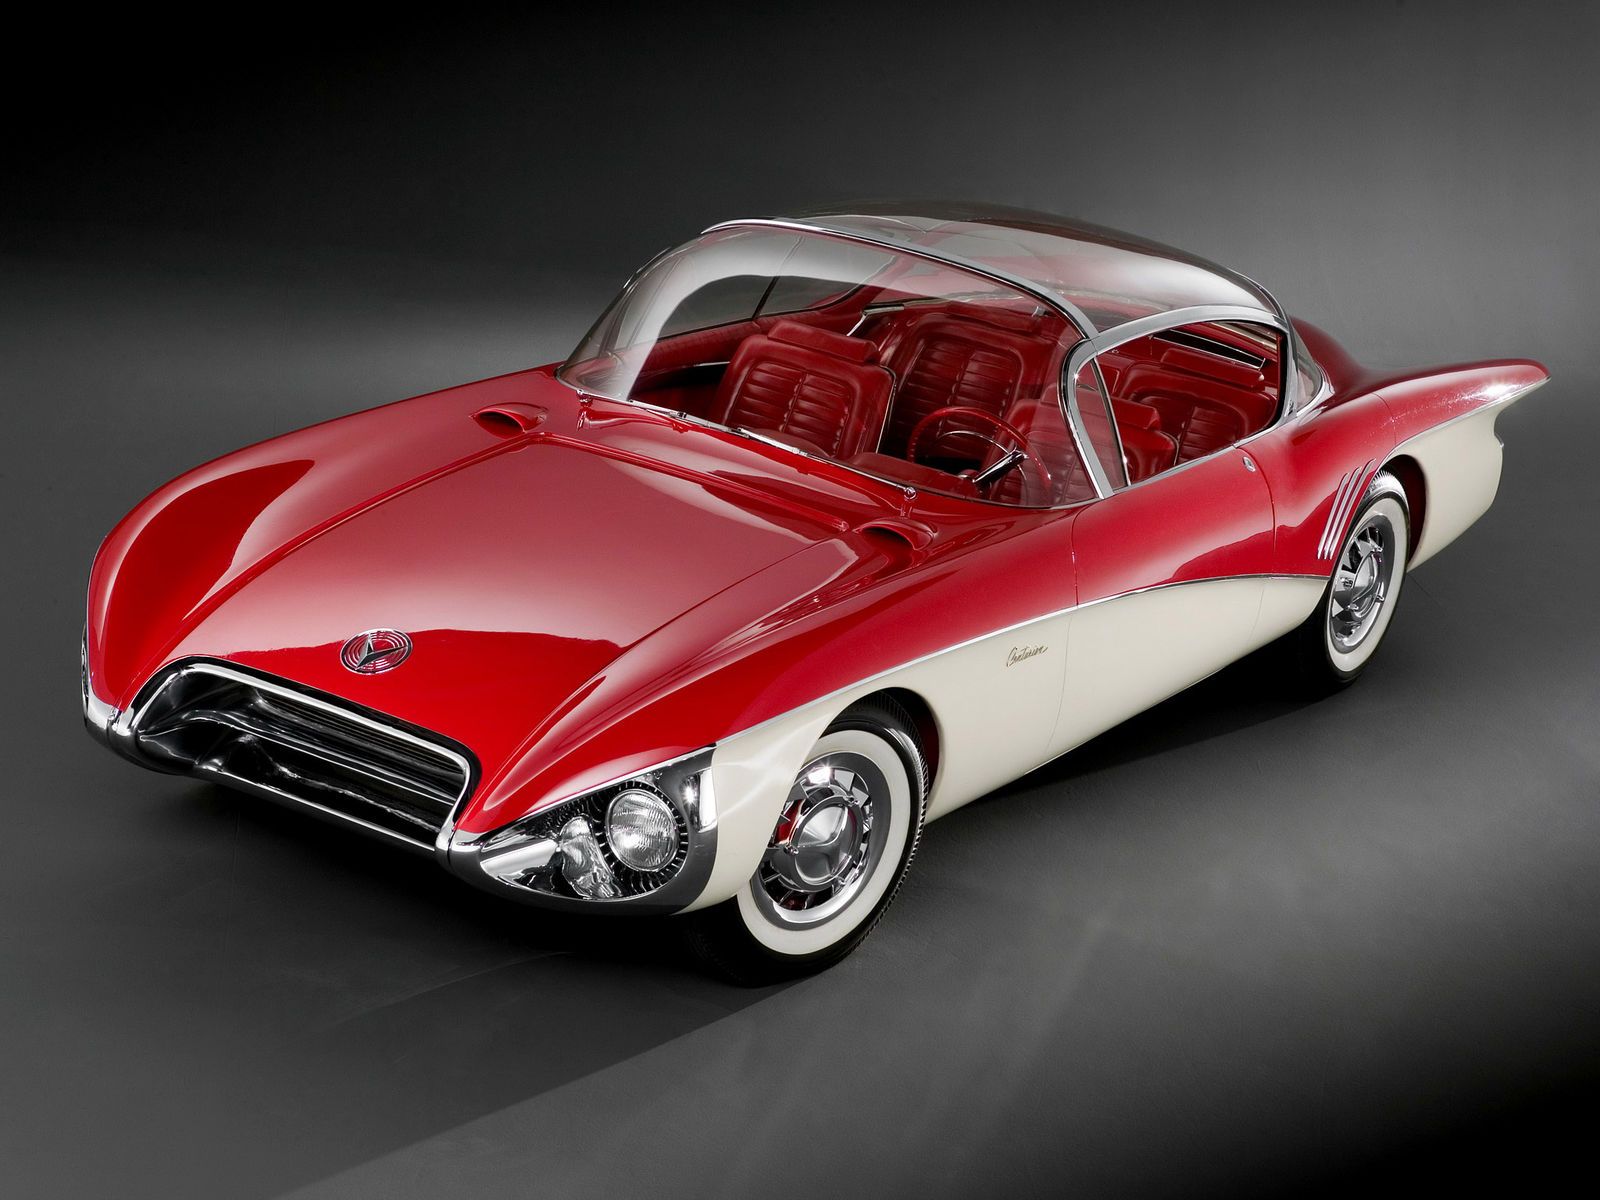 30 incredibly bonkers and beautiful cars from the 1950s to now image 8